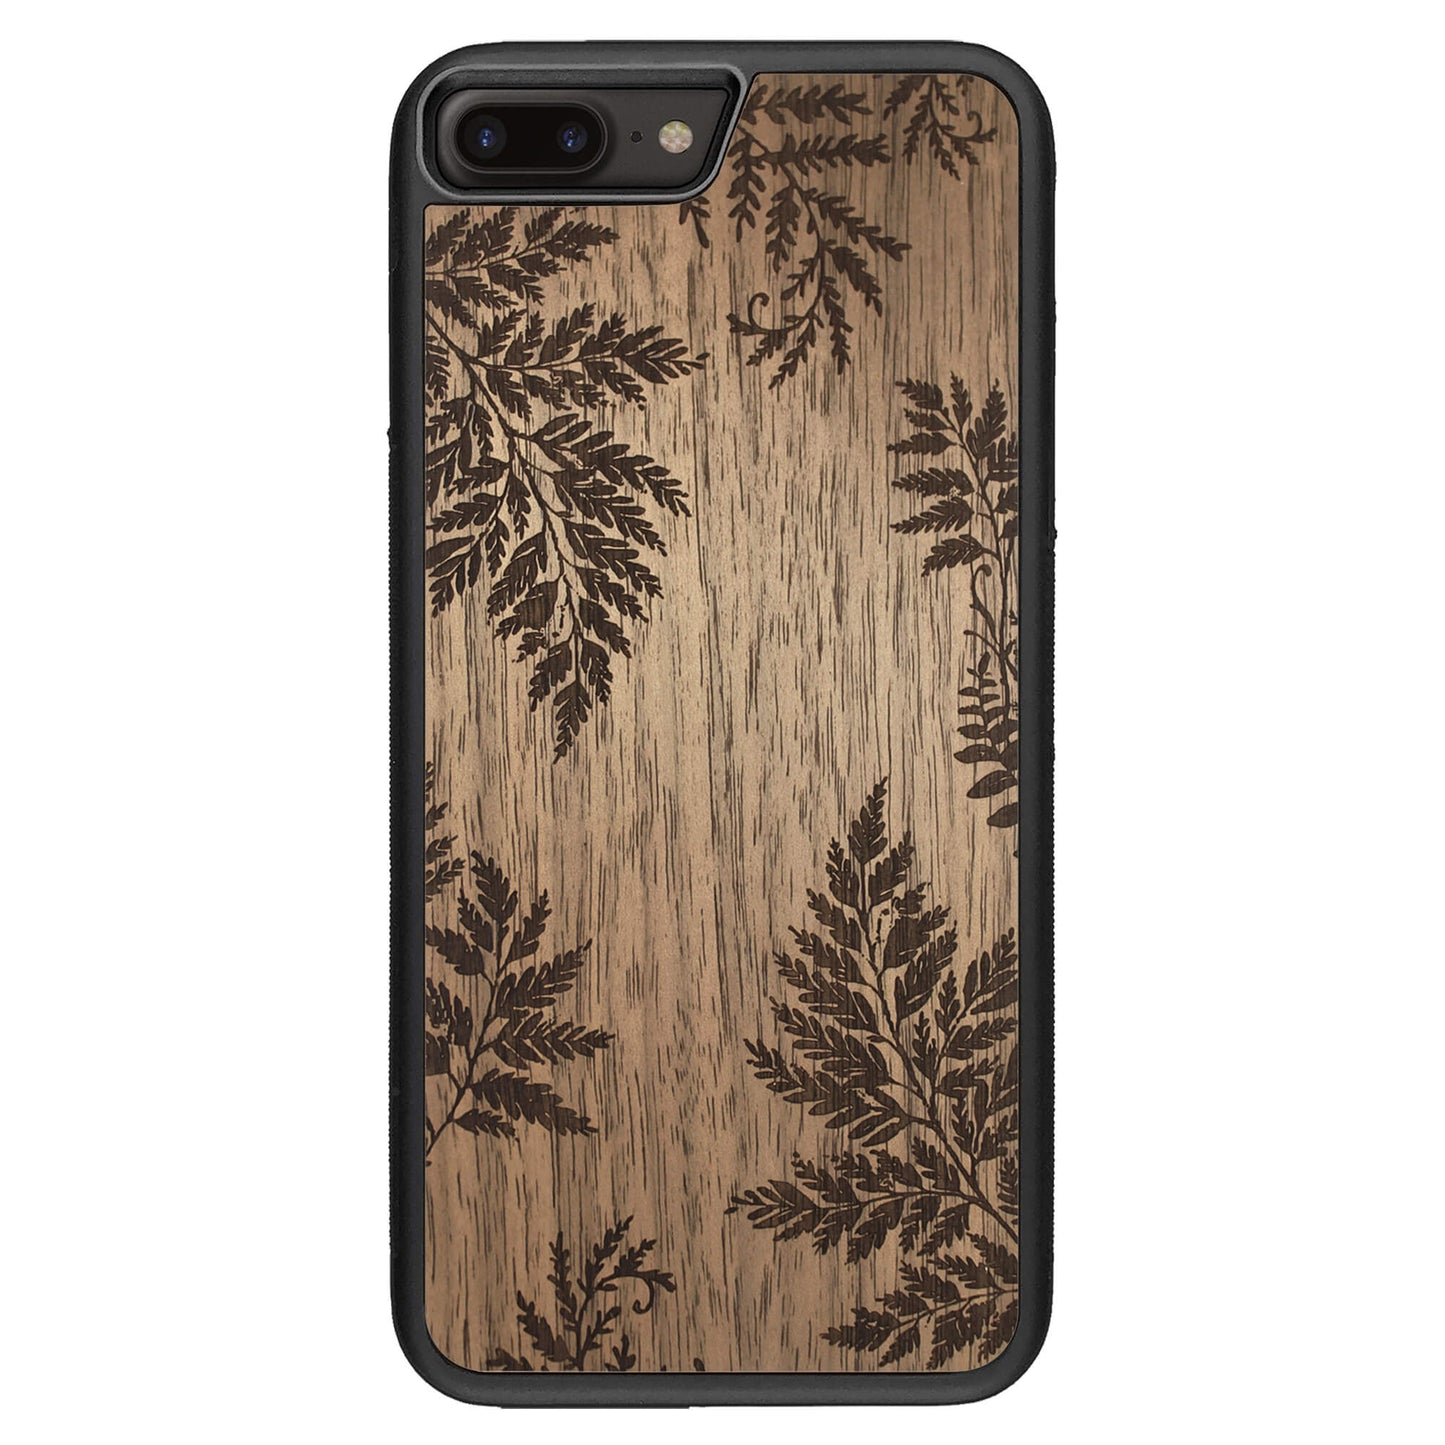 Wooden Case for iPhone 8 Plus Botanical Fern